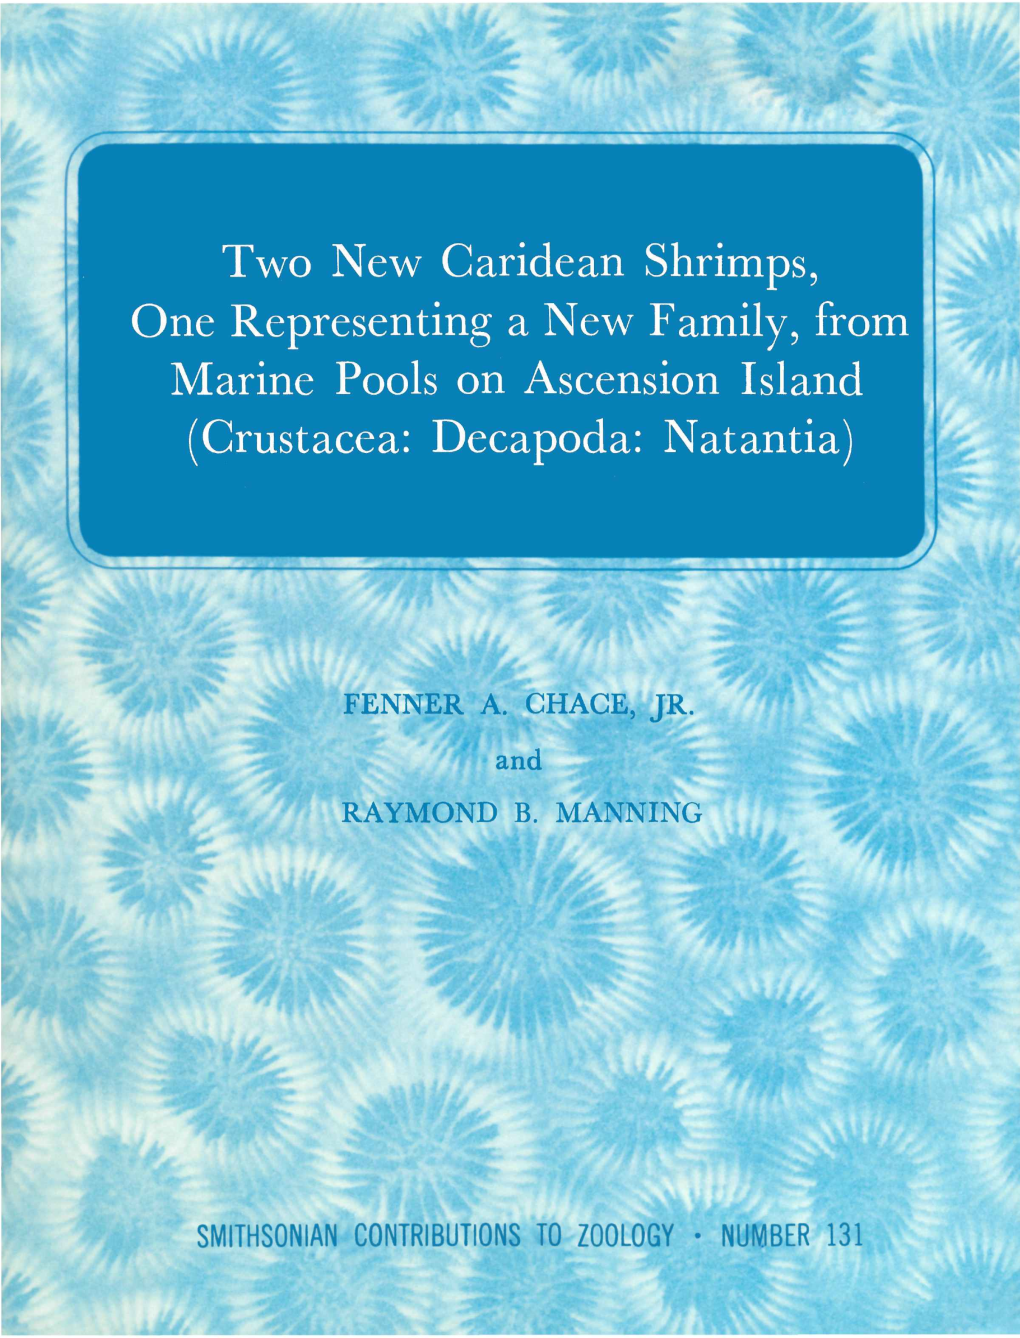 Two New Caridean Shrimps, One Representing a New Family, from Marine Pools on Ascension Island (Crustacea: Decapoda: Natantia)